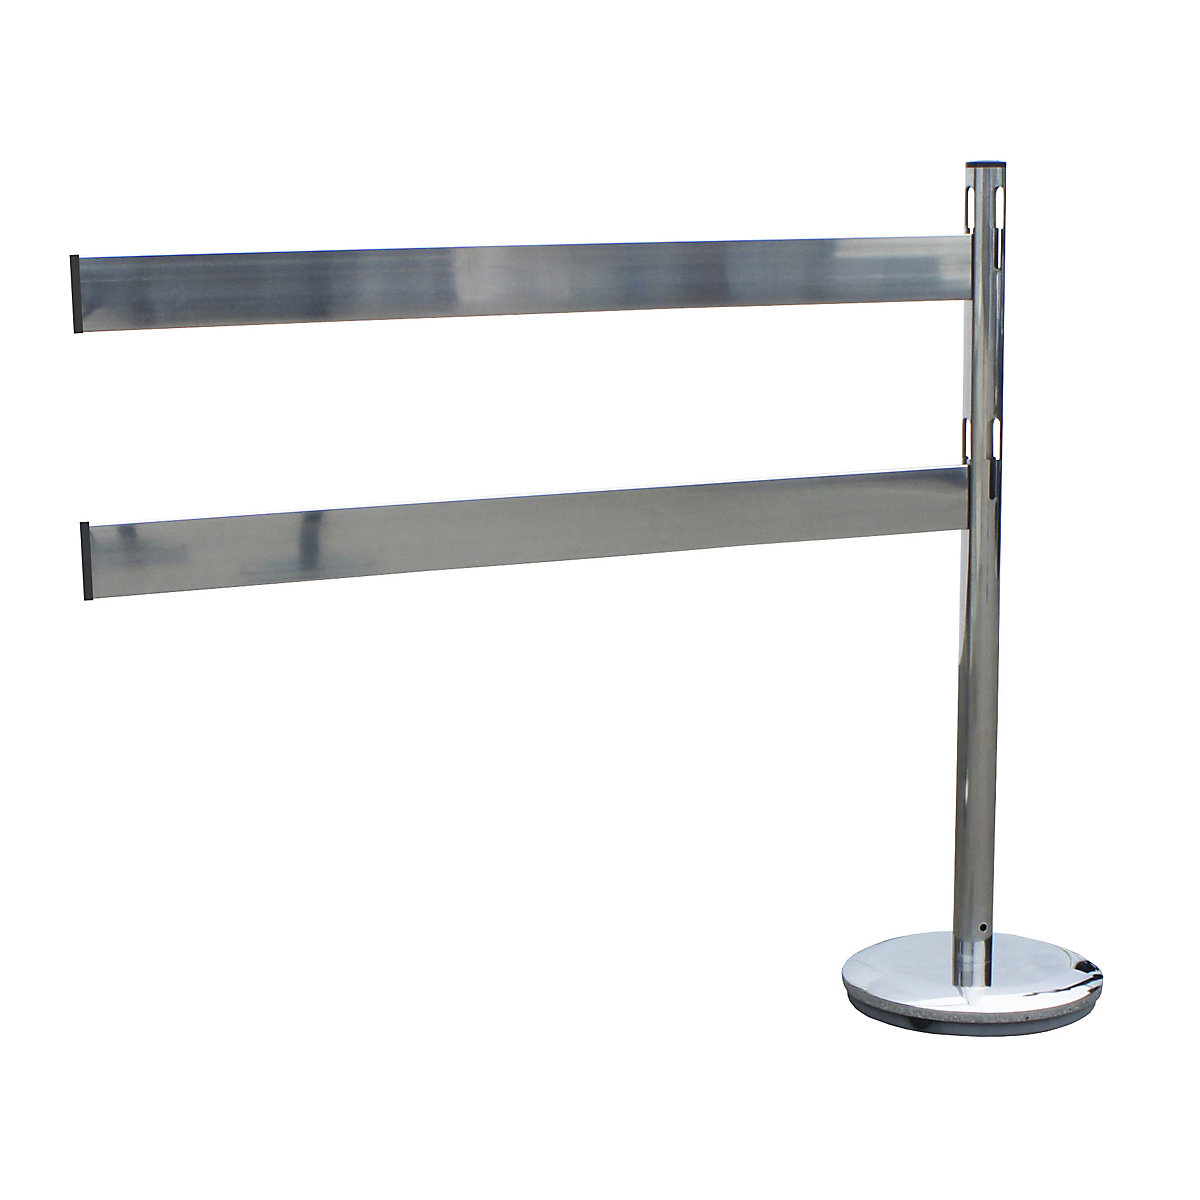 Barrier post extension set with rails – VISO, 1 post, 2 rails, stainless steel / chrome plated-3